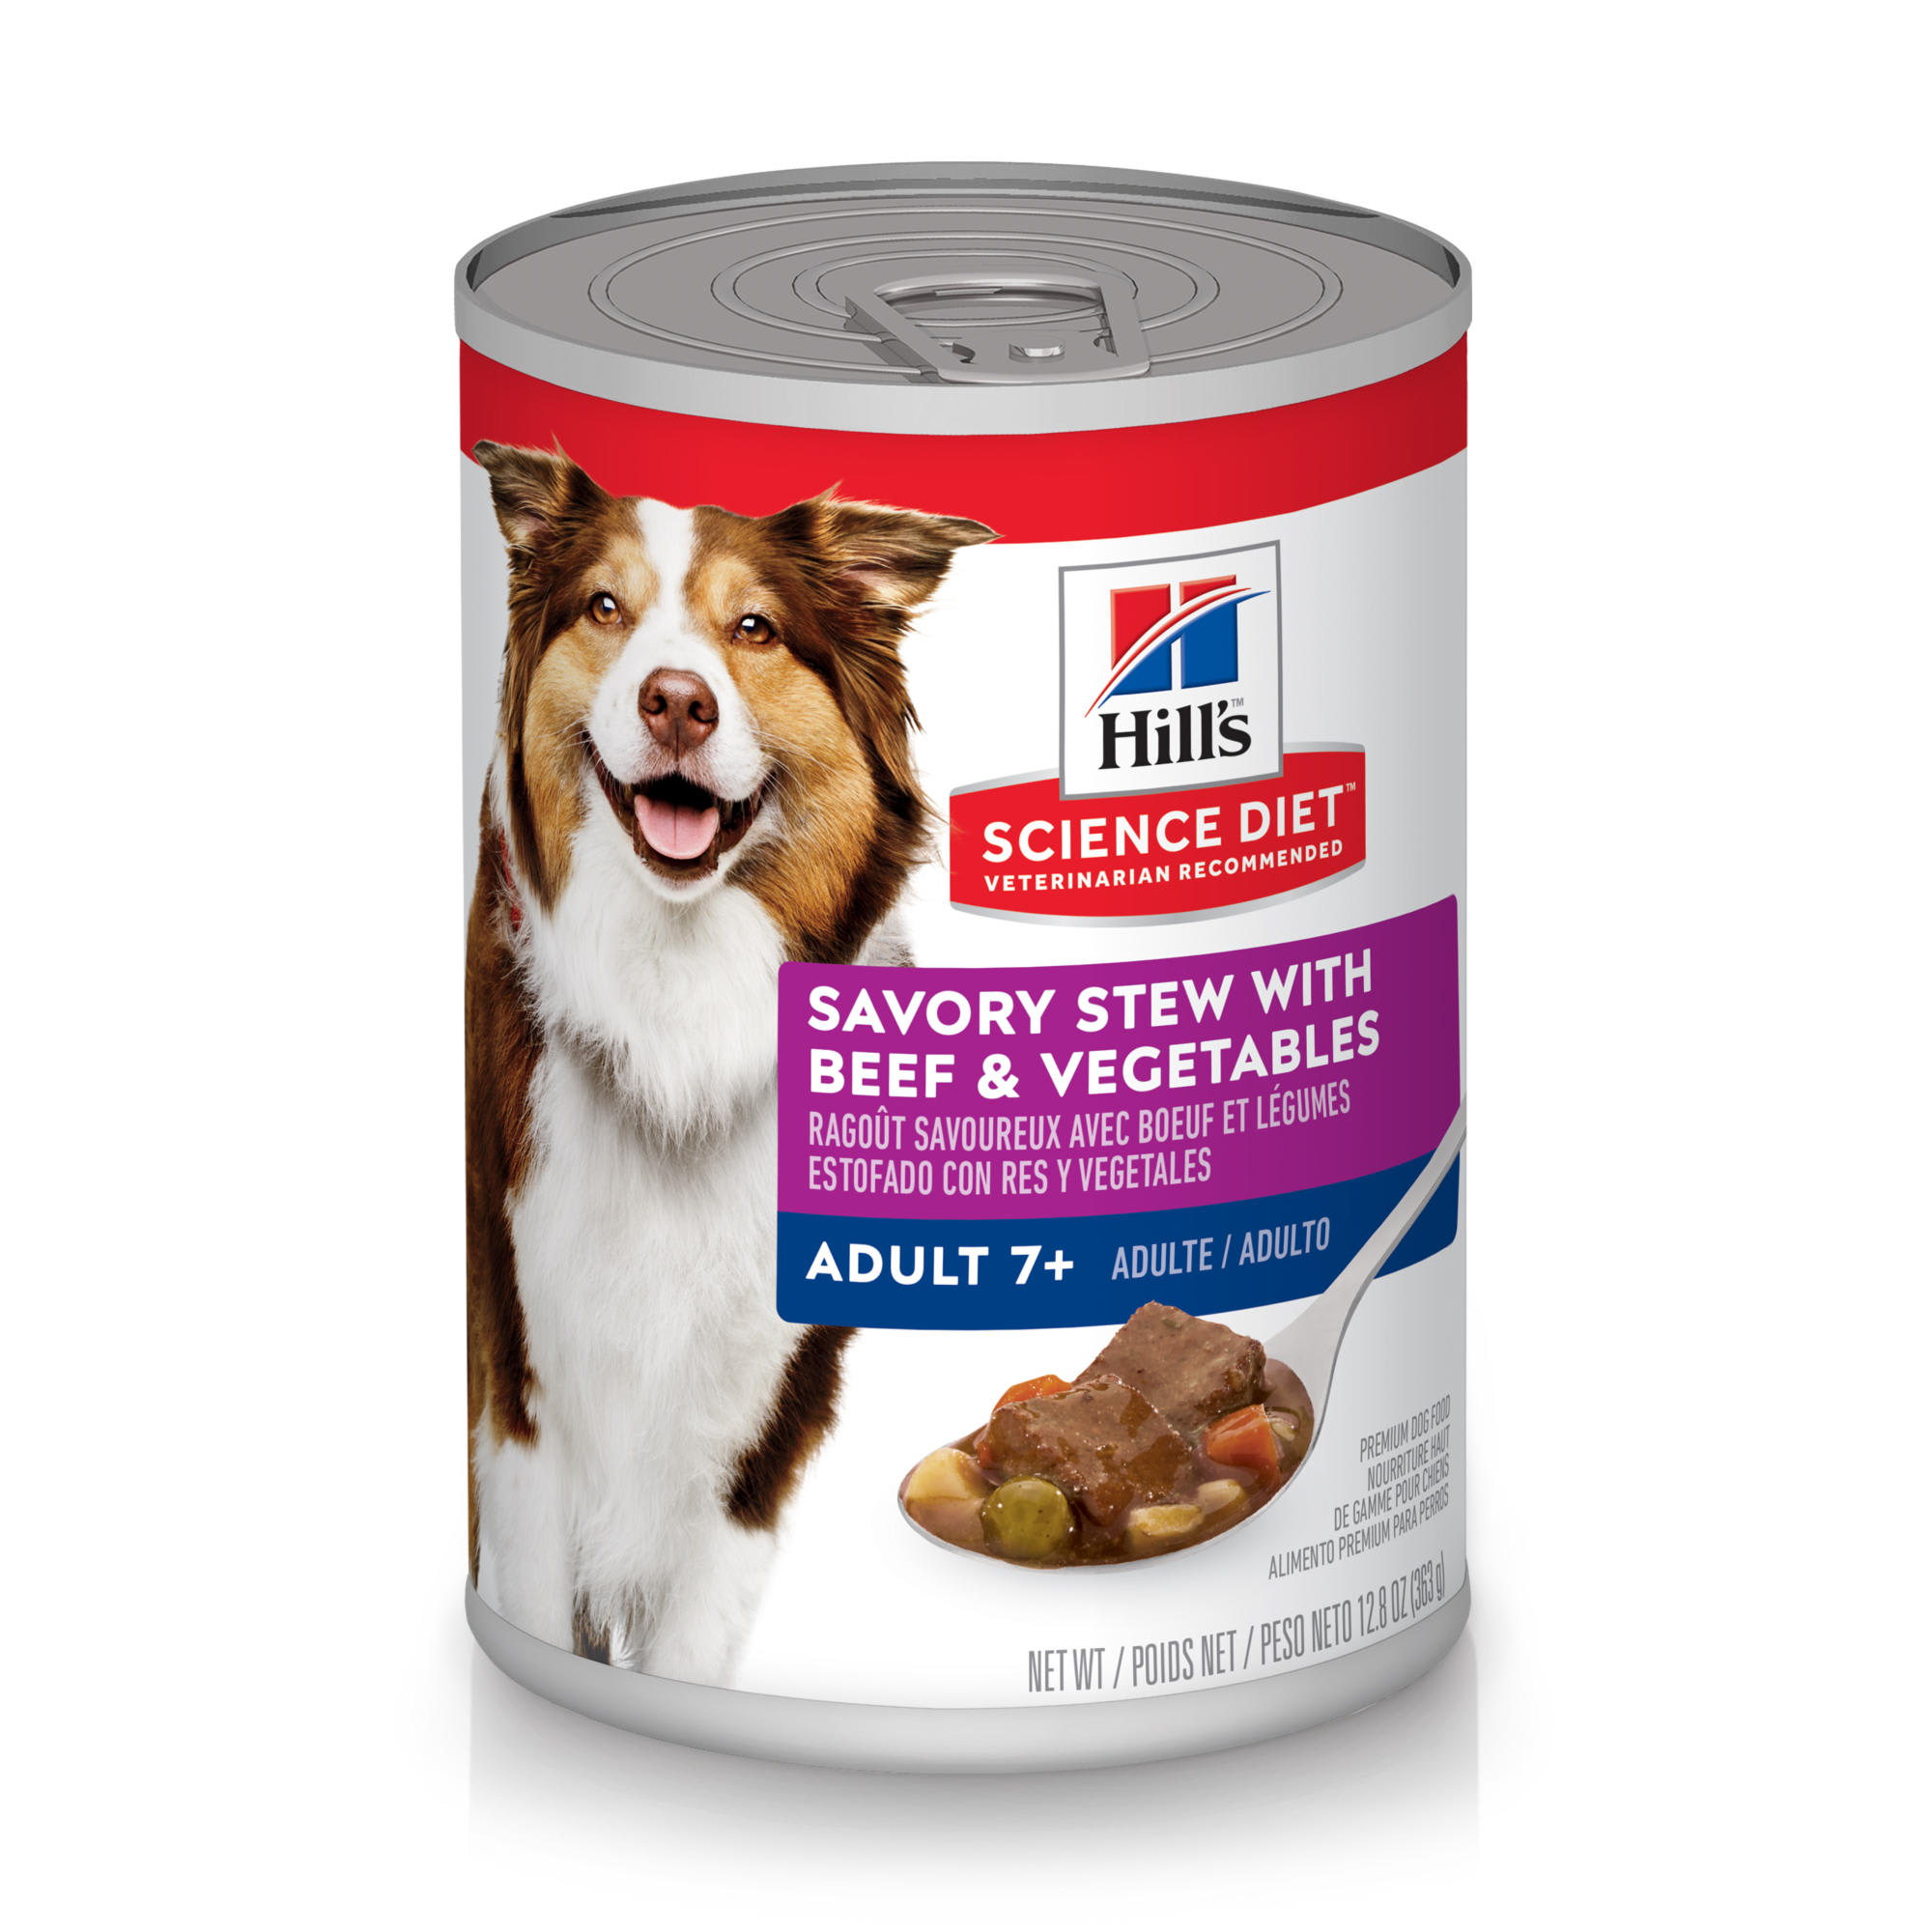 Wet Dog Food: 40% Off Repeat Delivery + 